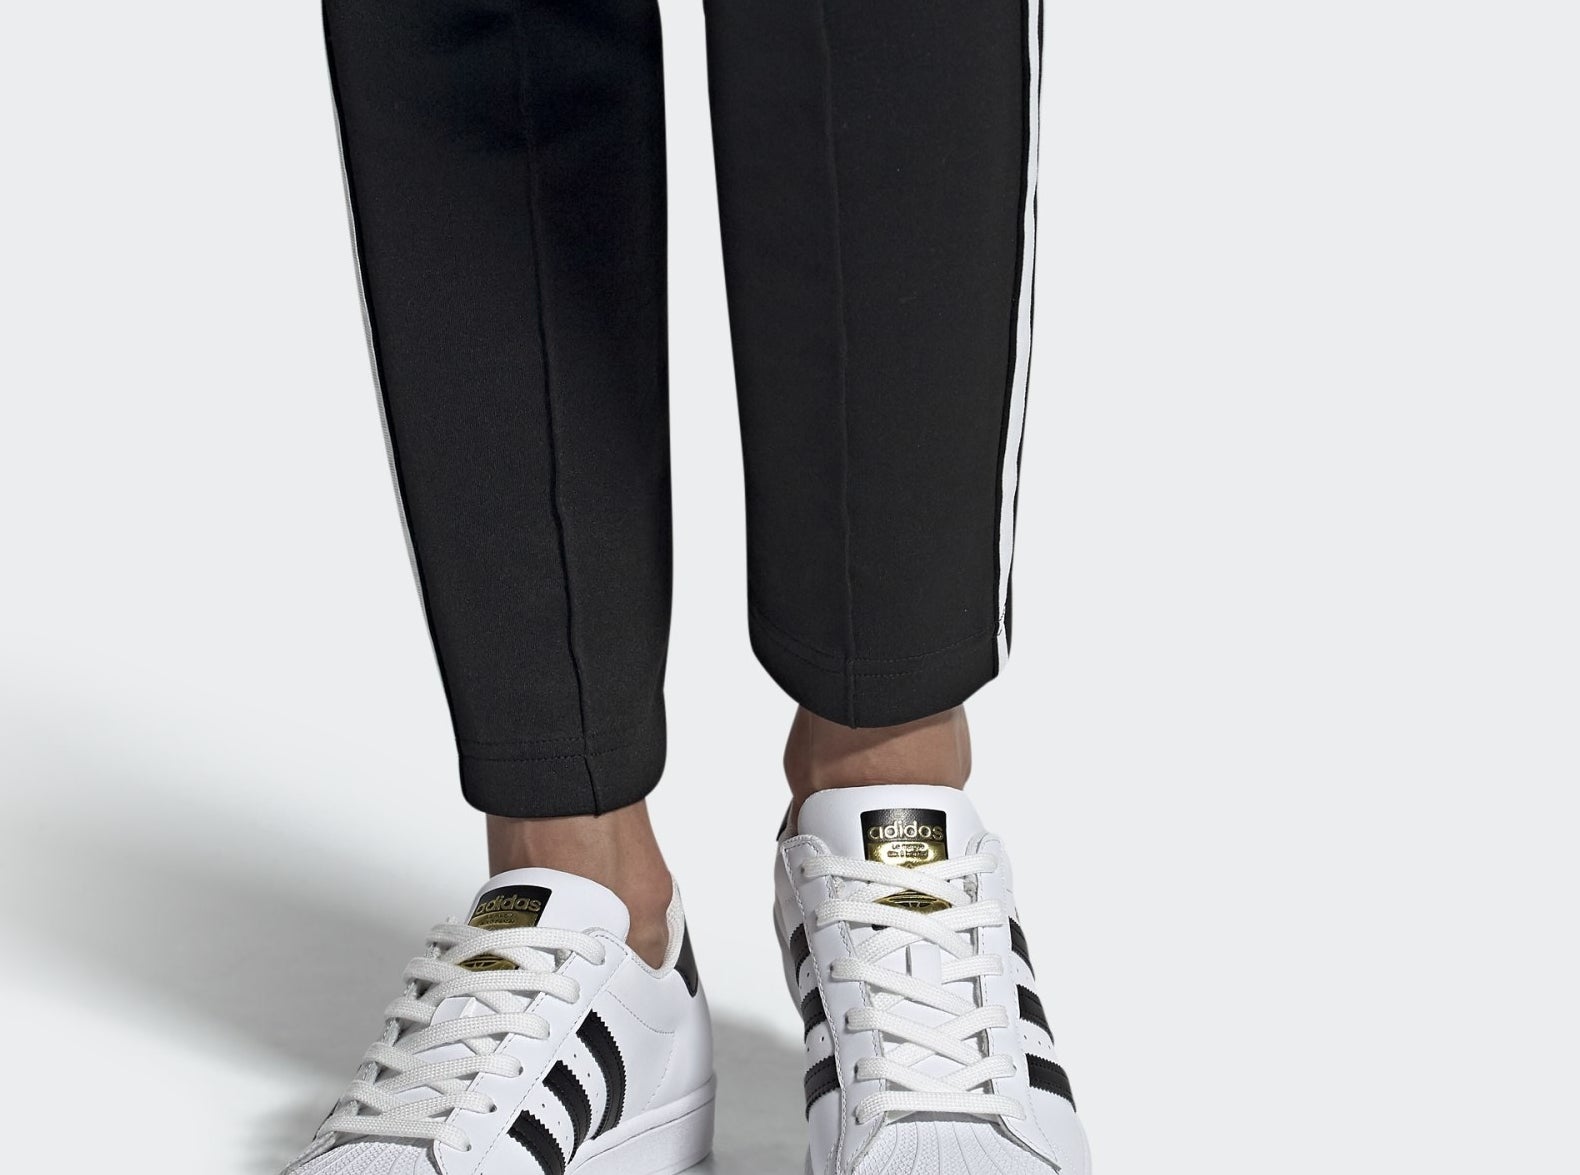 model wearing the white superstar adidas sneakers with black stripes